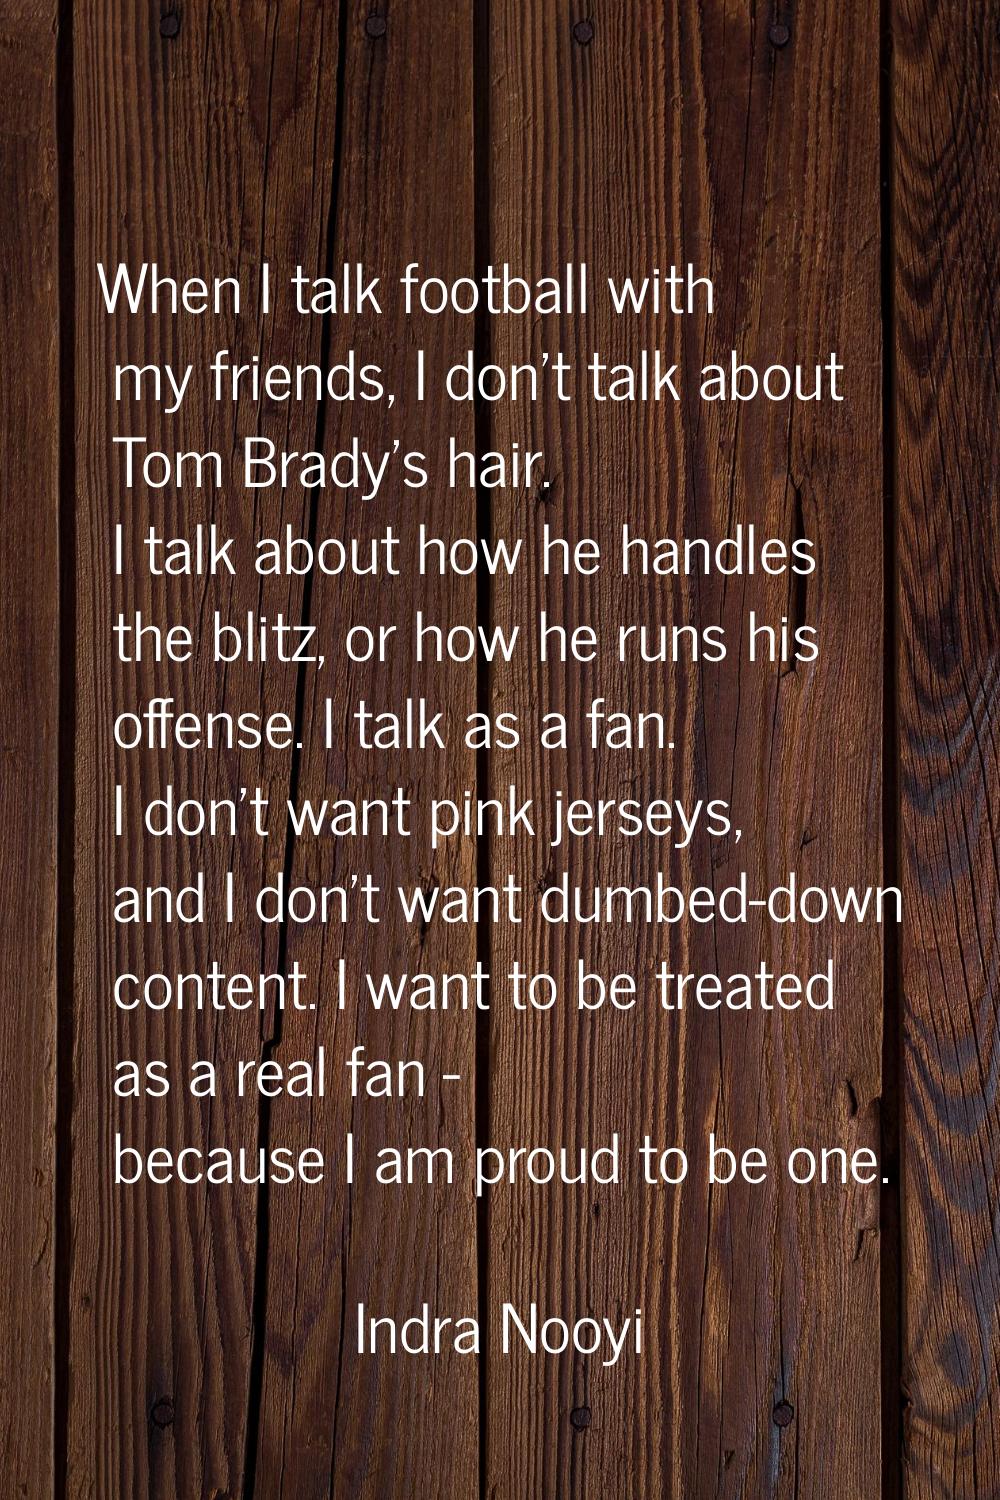 When I talk football with my friends, I don't talk about Tom Brady's hair. I talk about how he hand